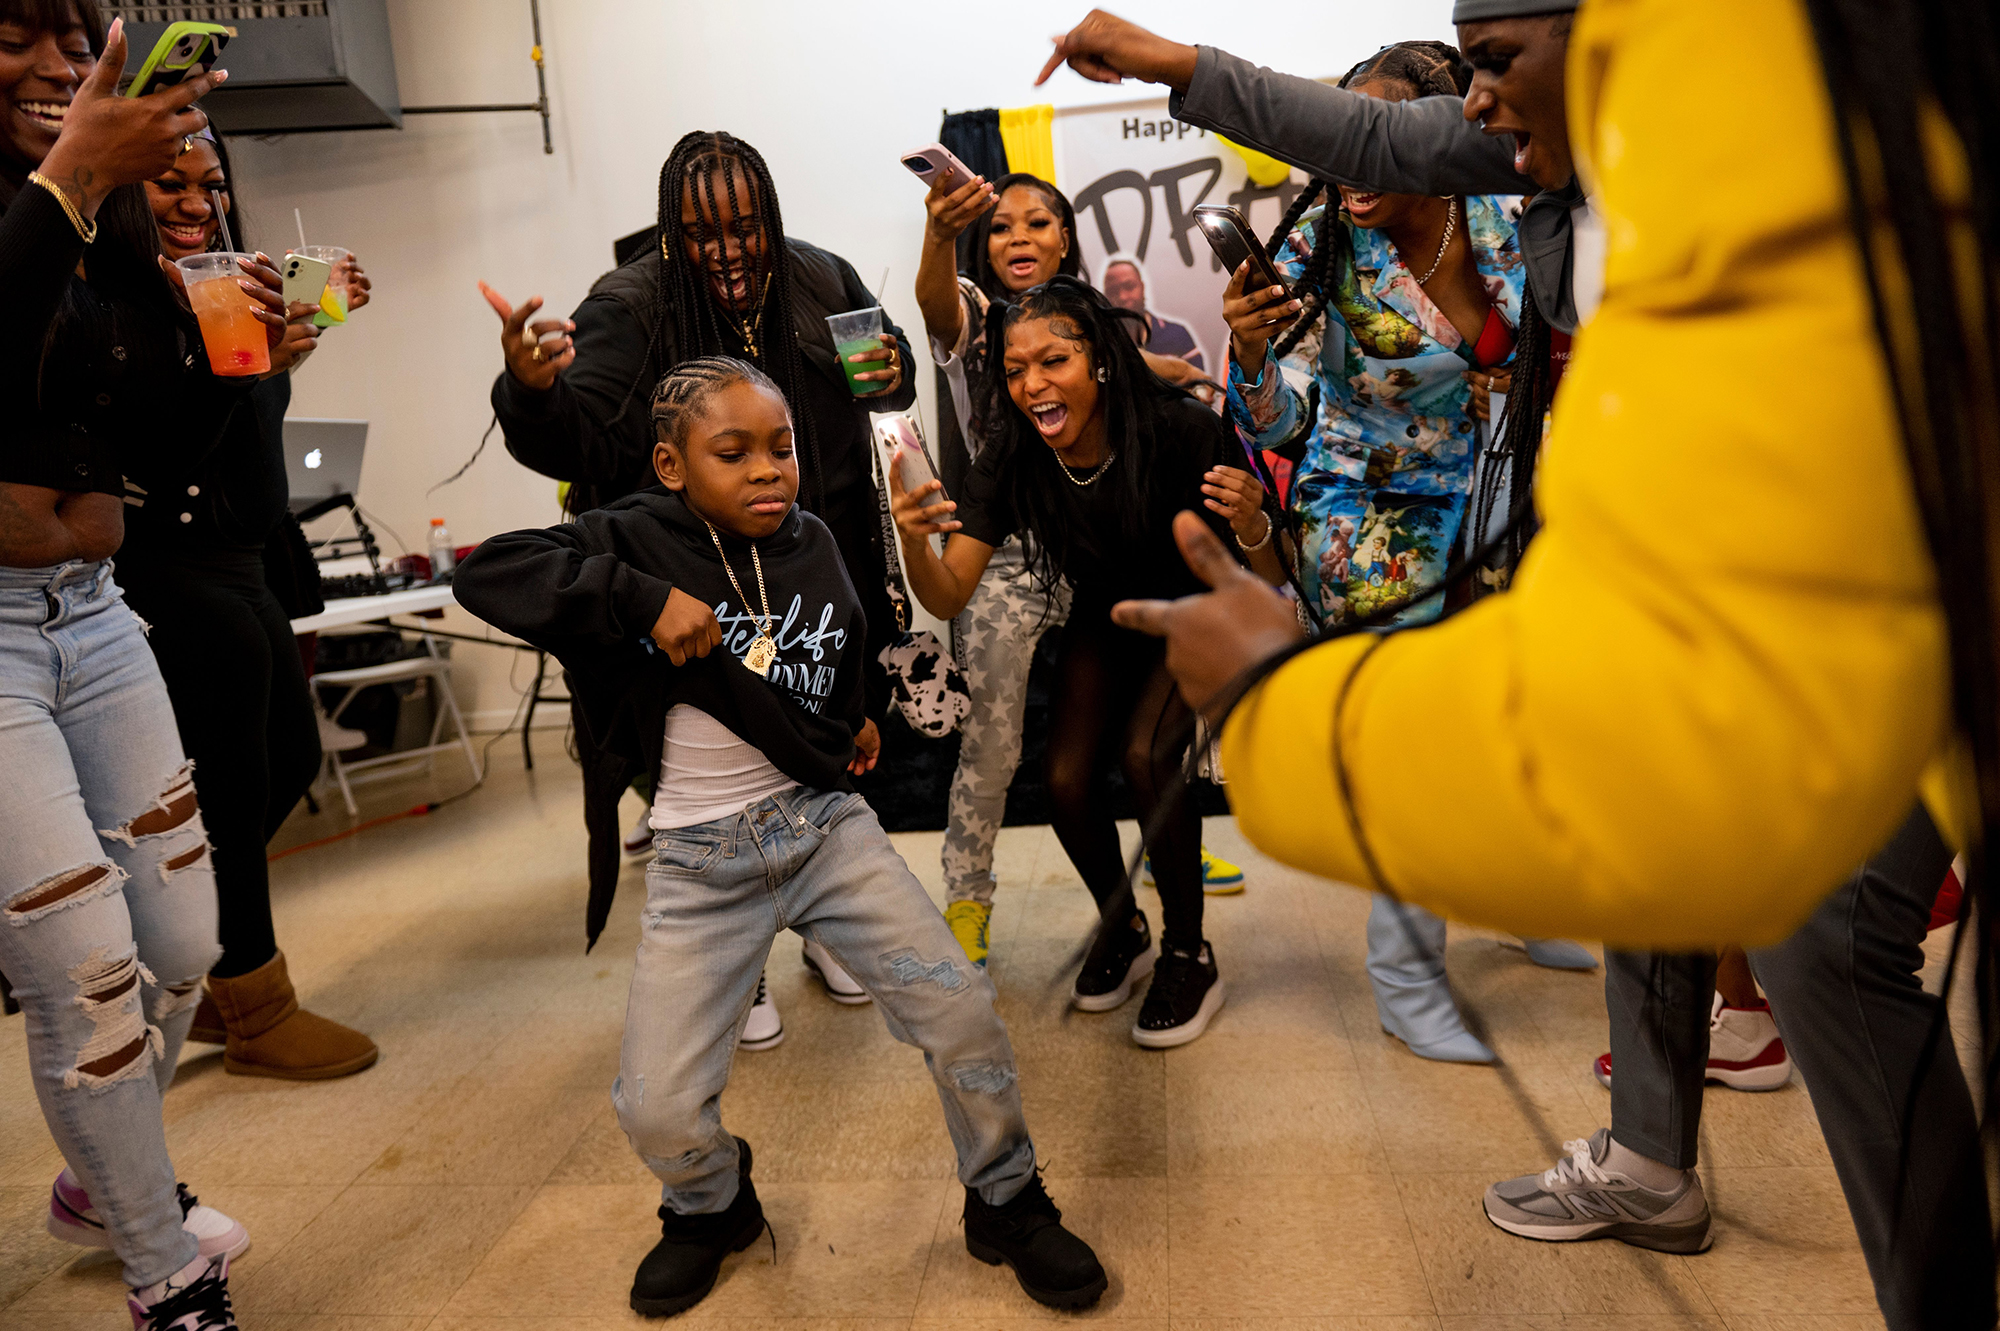 Jamma, 8, dances as friends and family happily look on.